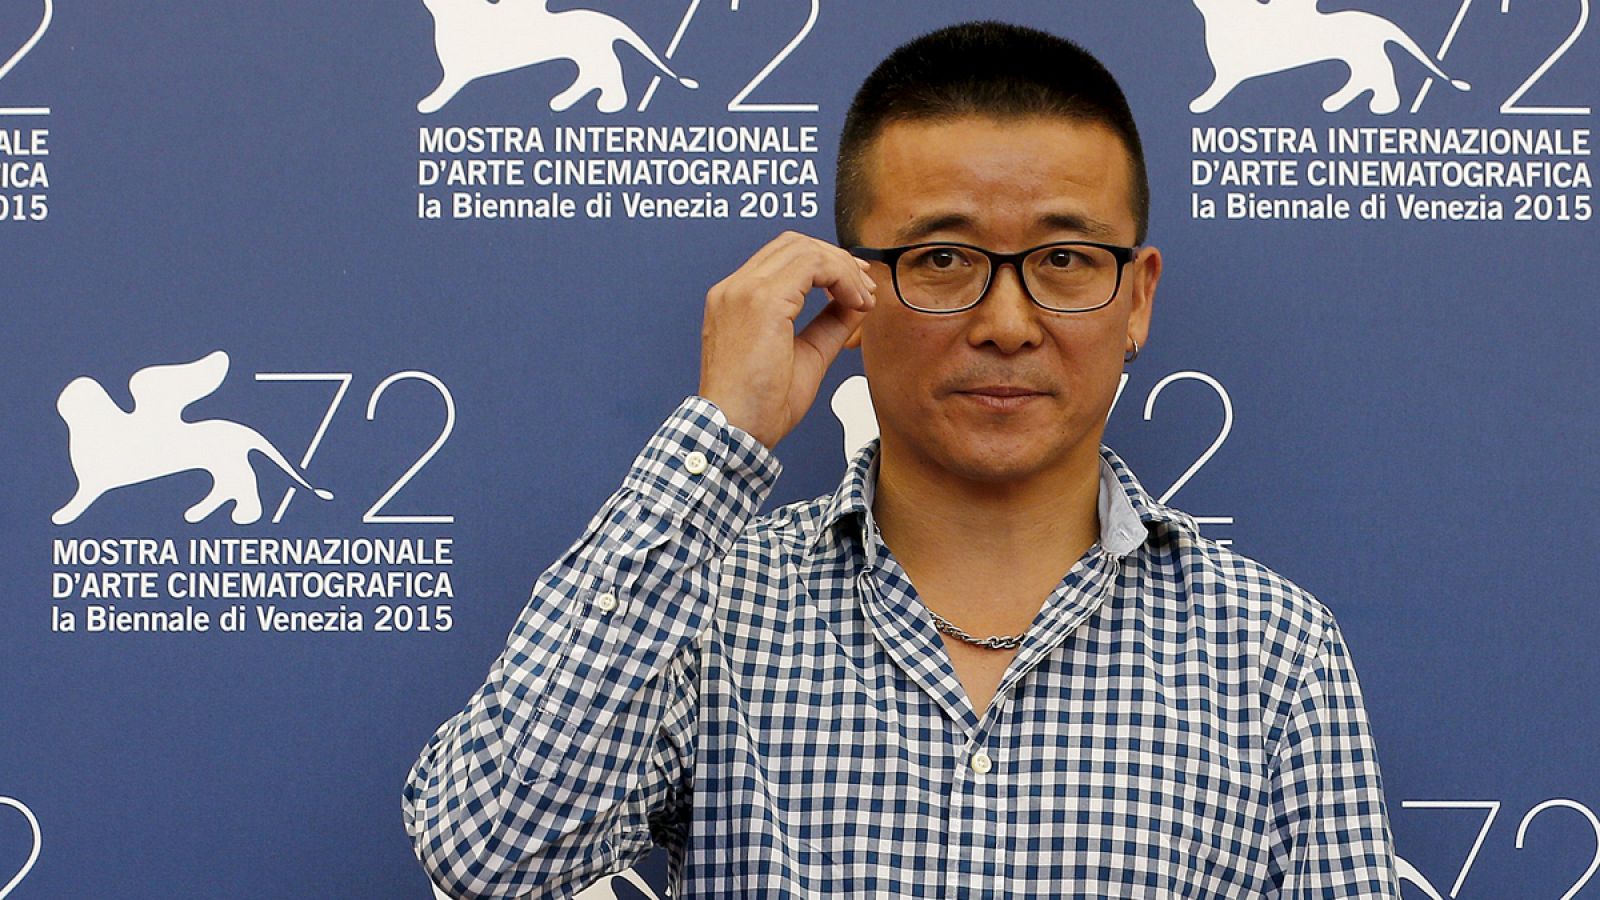 Director Zhao Liang attends the photocall for the movie "Bei Xi Mo Shuo" (Behemoth) at the 72nd Venice Film Festival